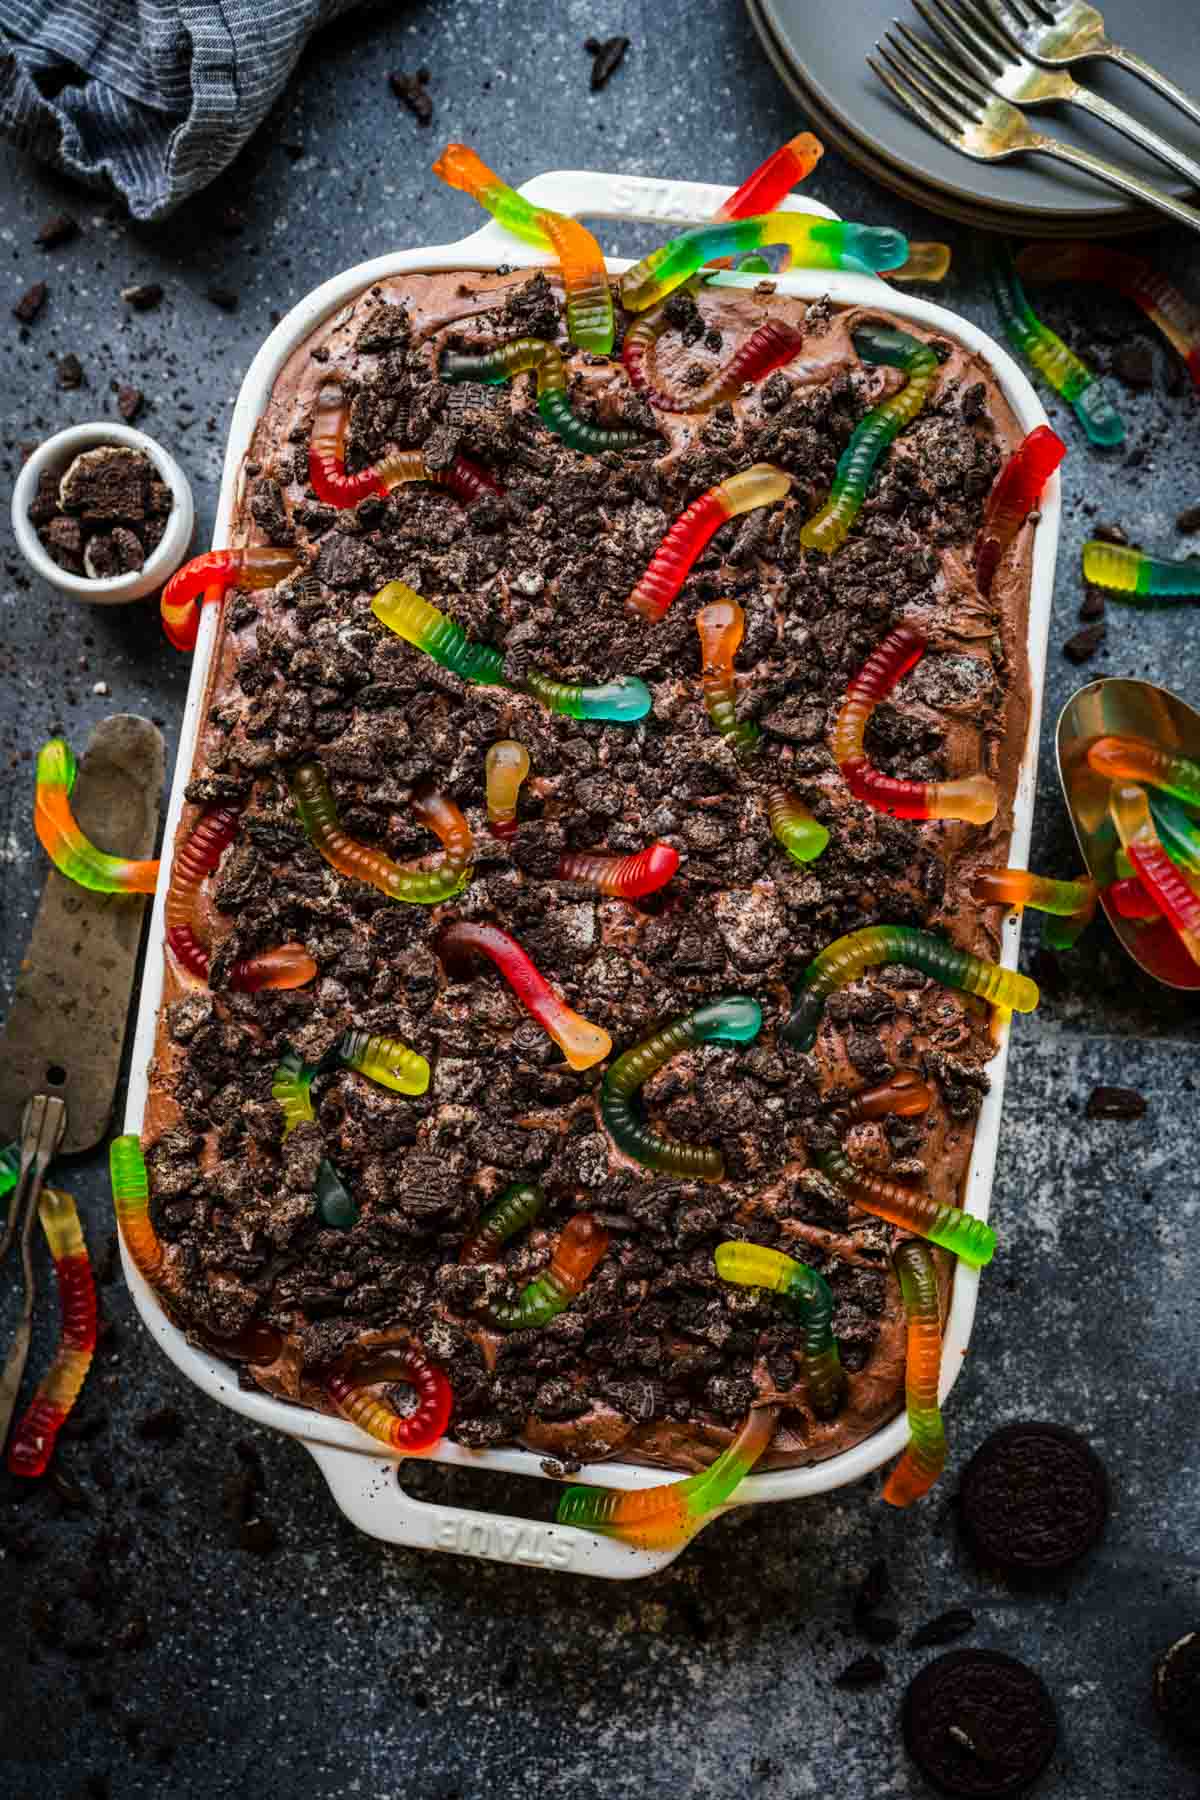 Chocolate Pudding Dirt Cake with pudding, crushed oreos, and gummy worms on top in baking dish